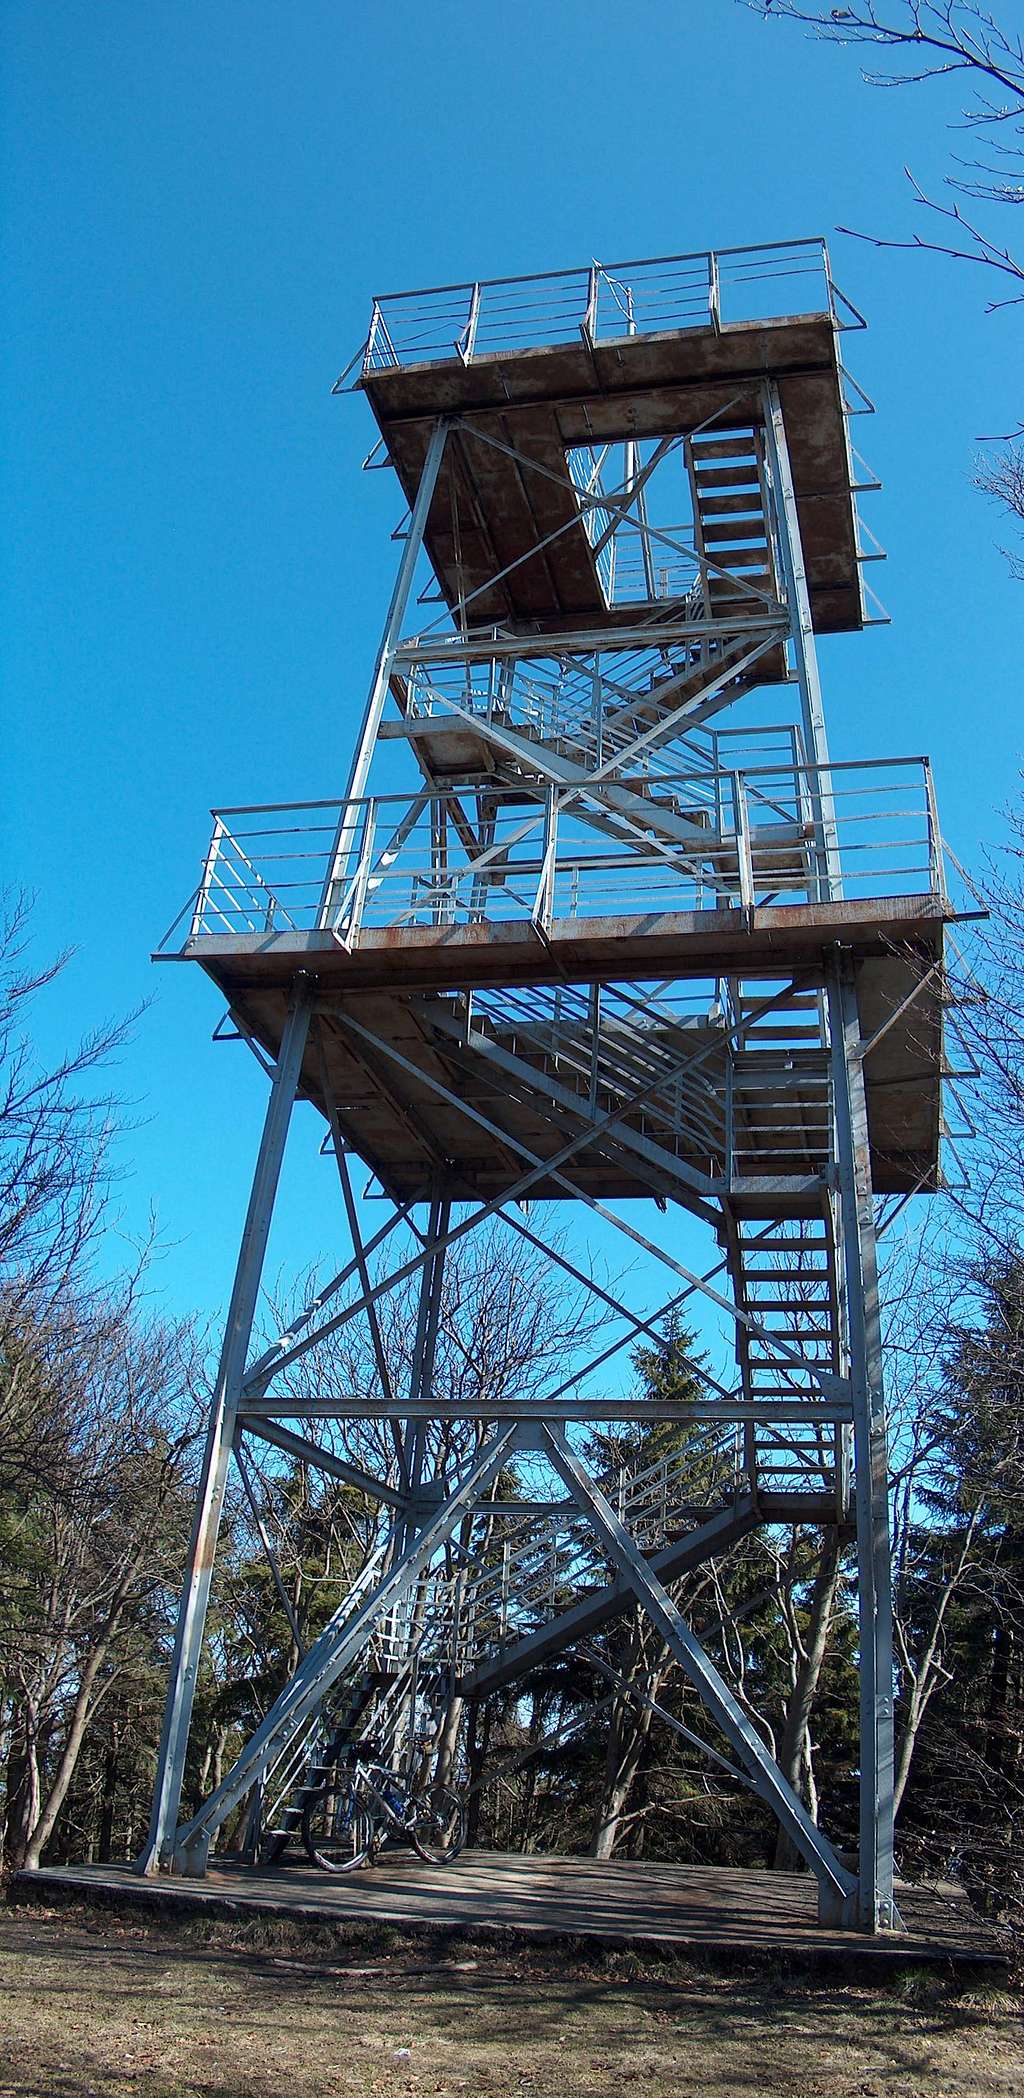 The kalenica Outlook tower